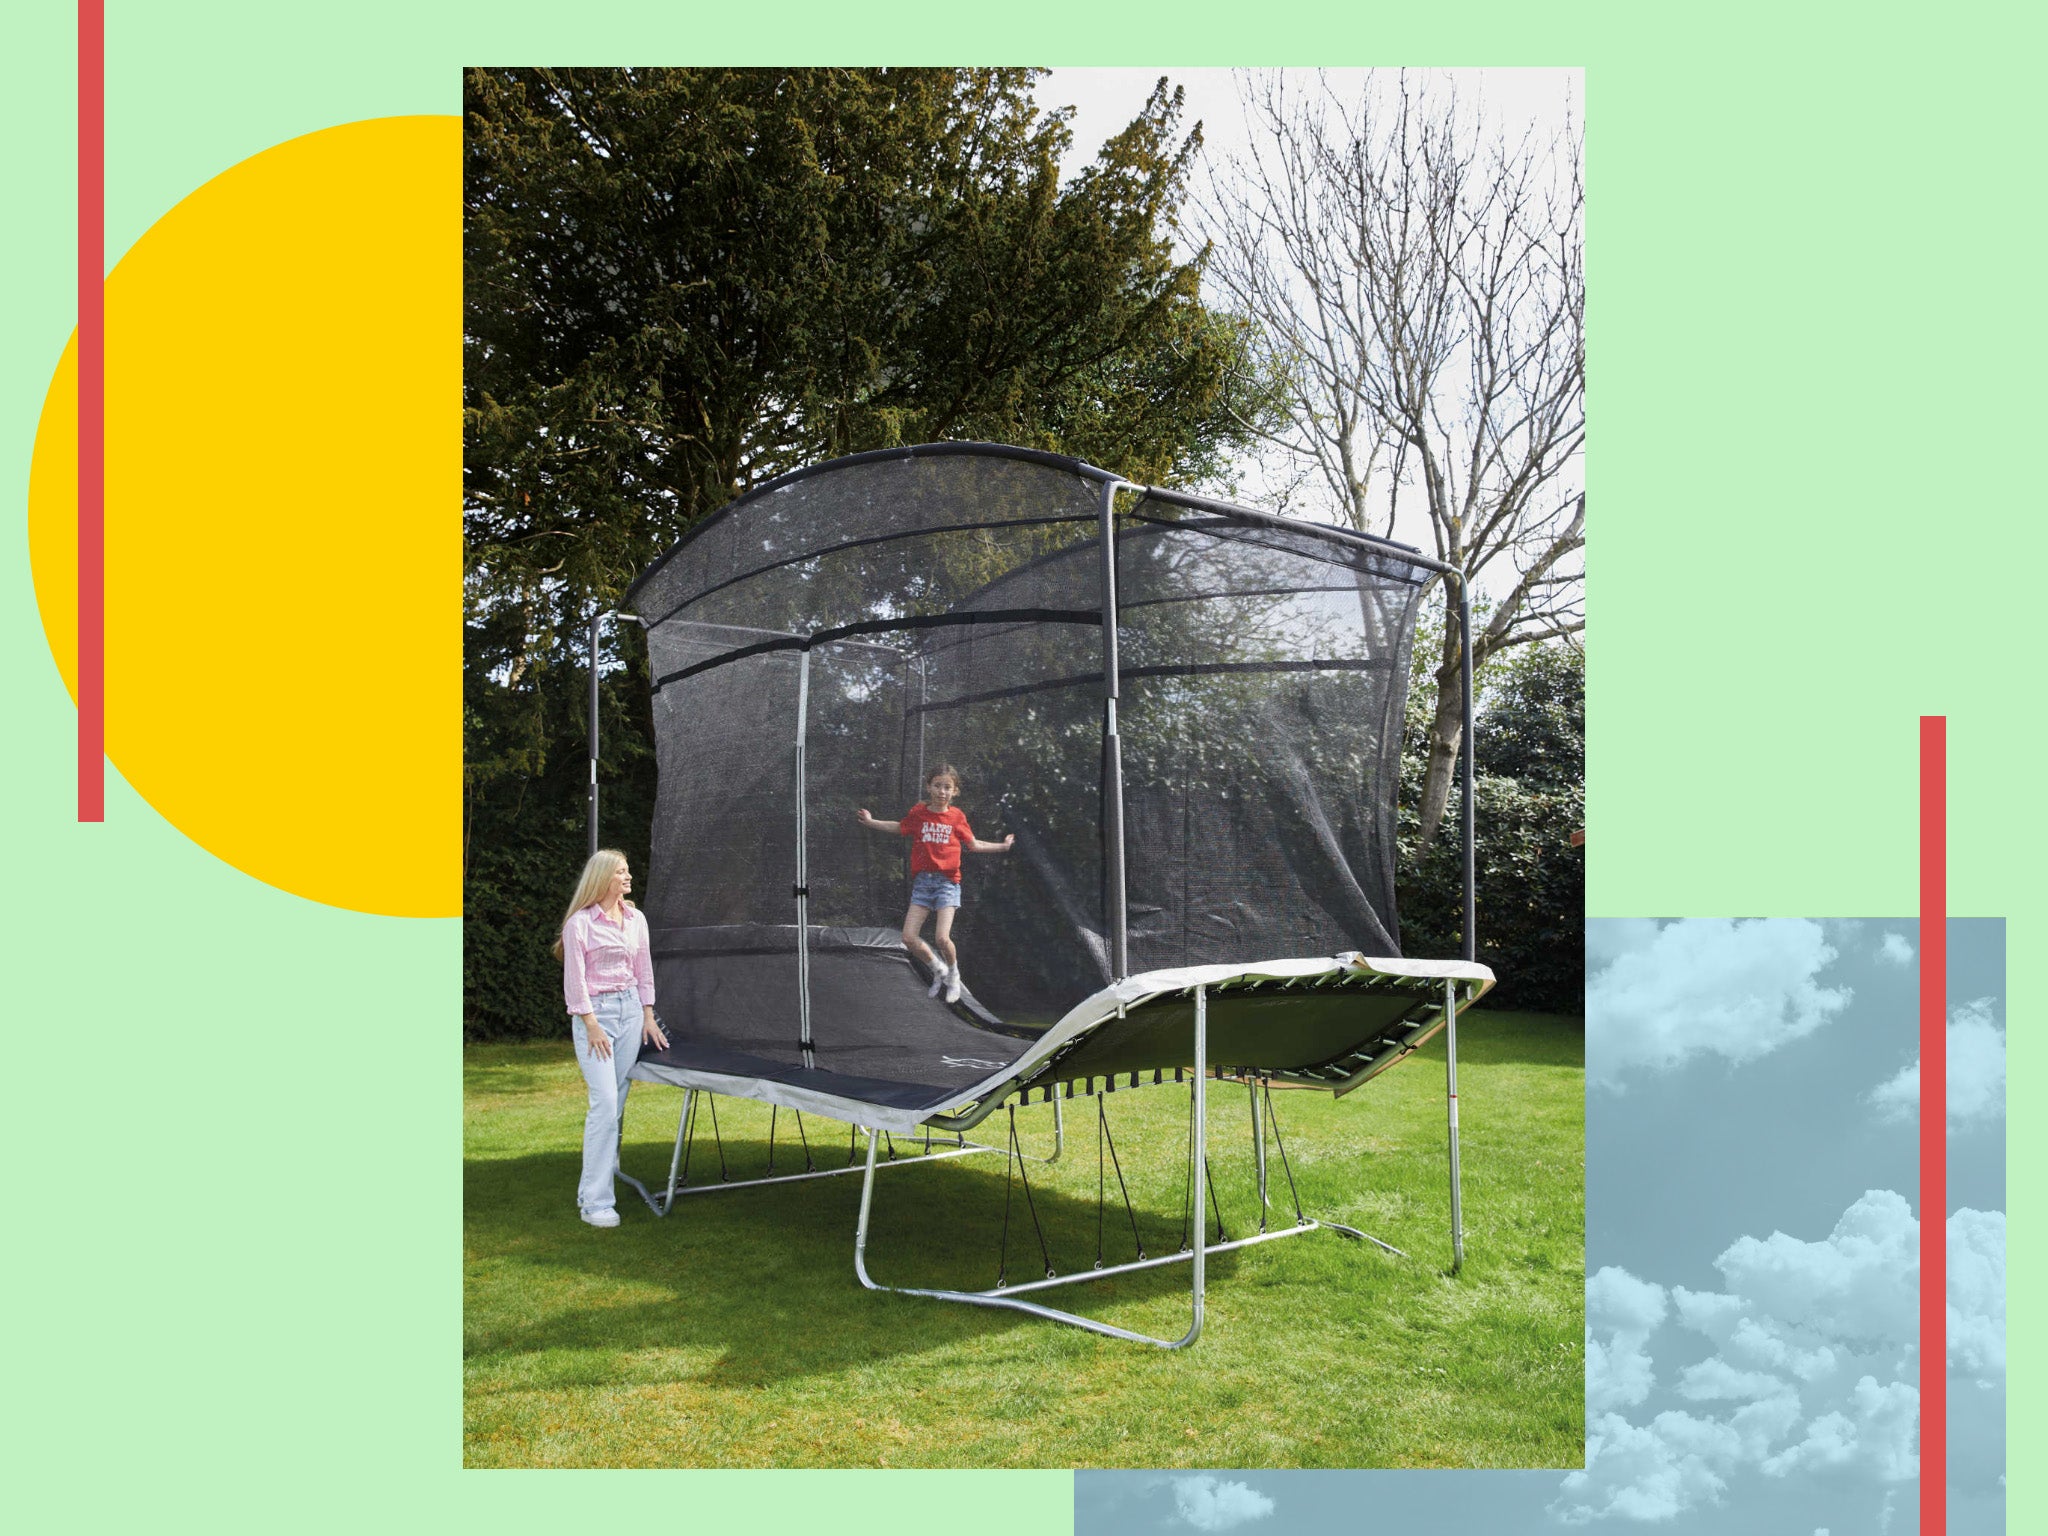 The budget trampoline is 14ft